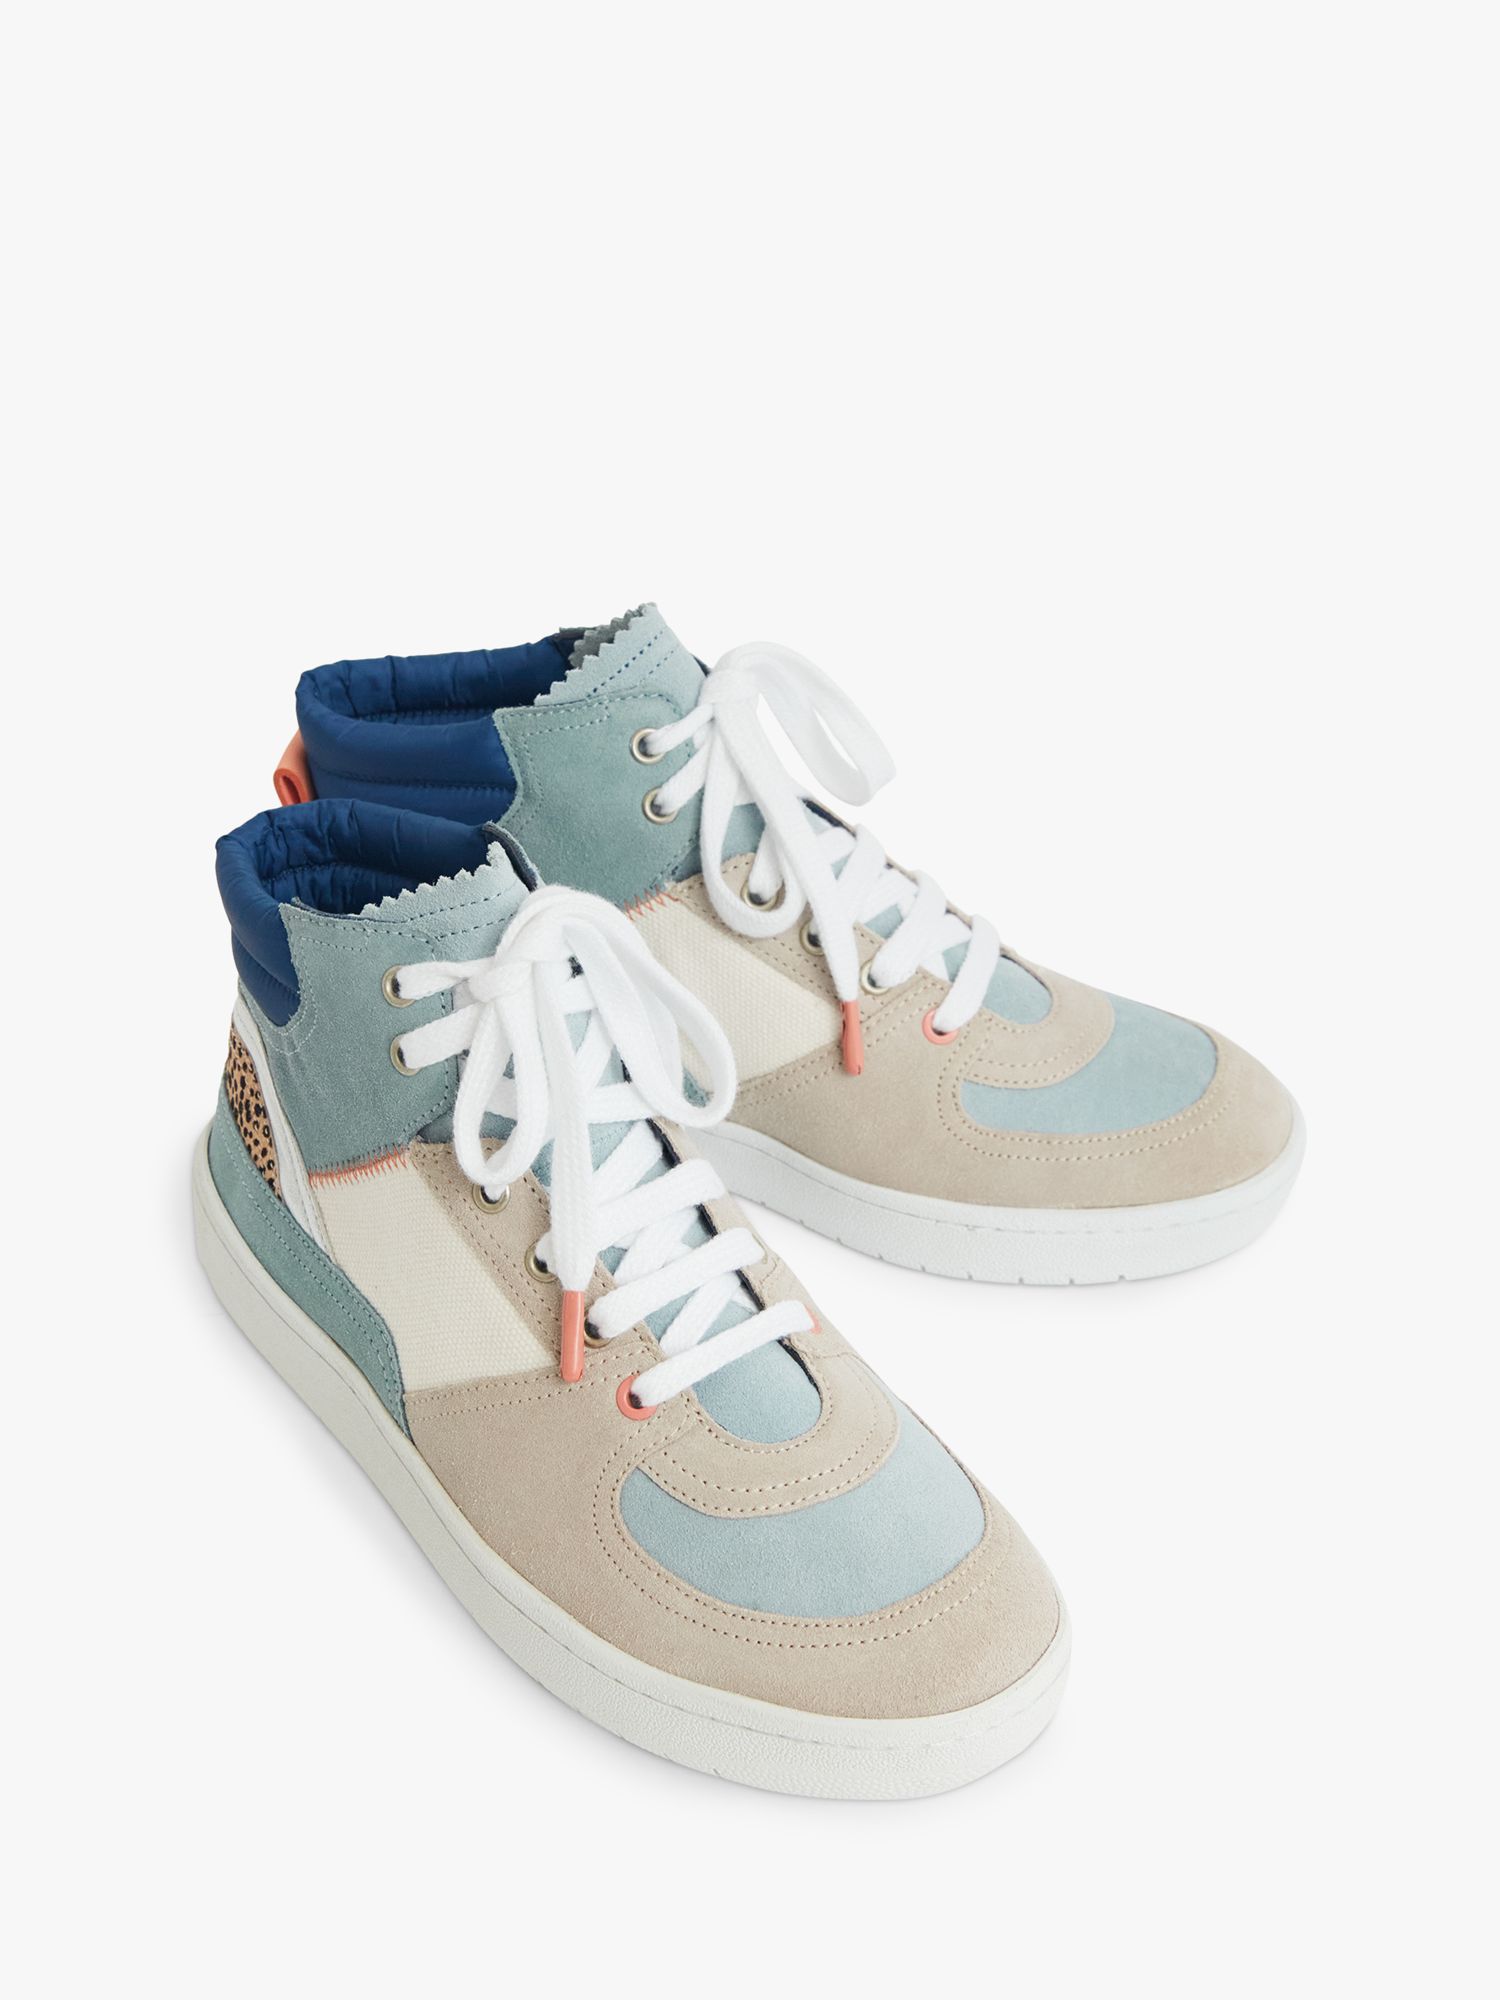 White Stuff Holly Suede Hi-Top Trainers, White/Multi